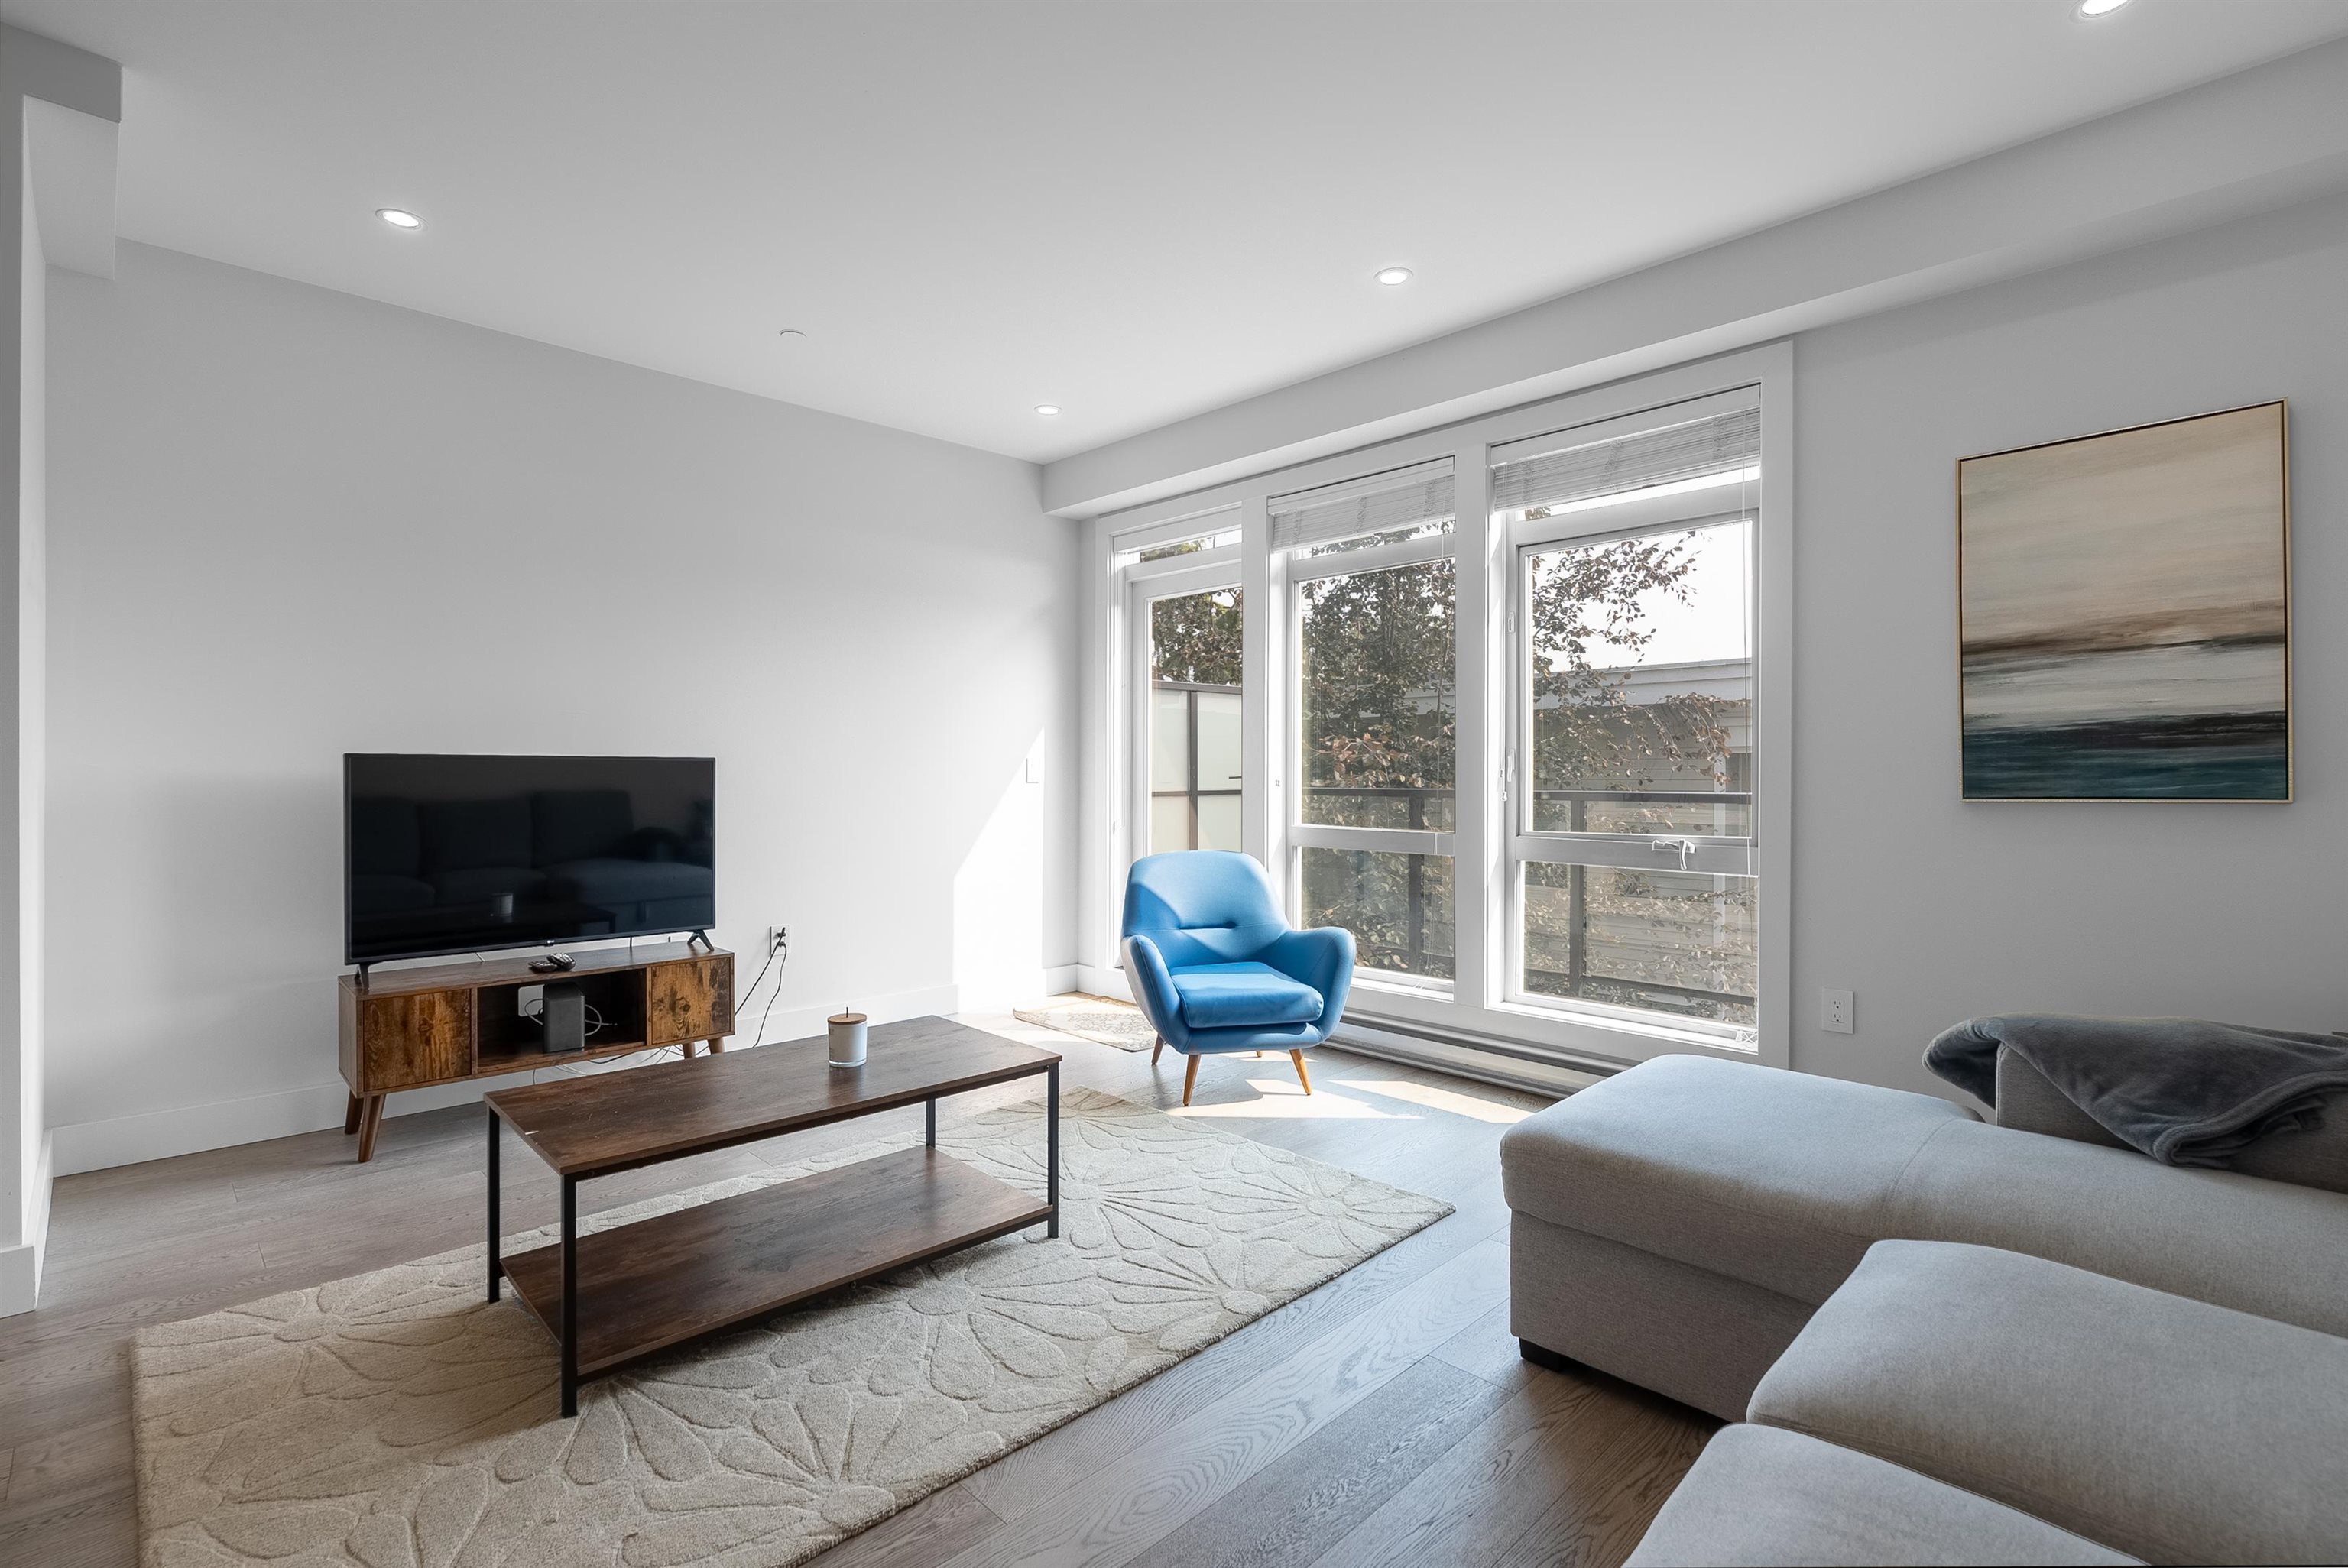 Listing image of 11 115 W QUEENS ROAD